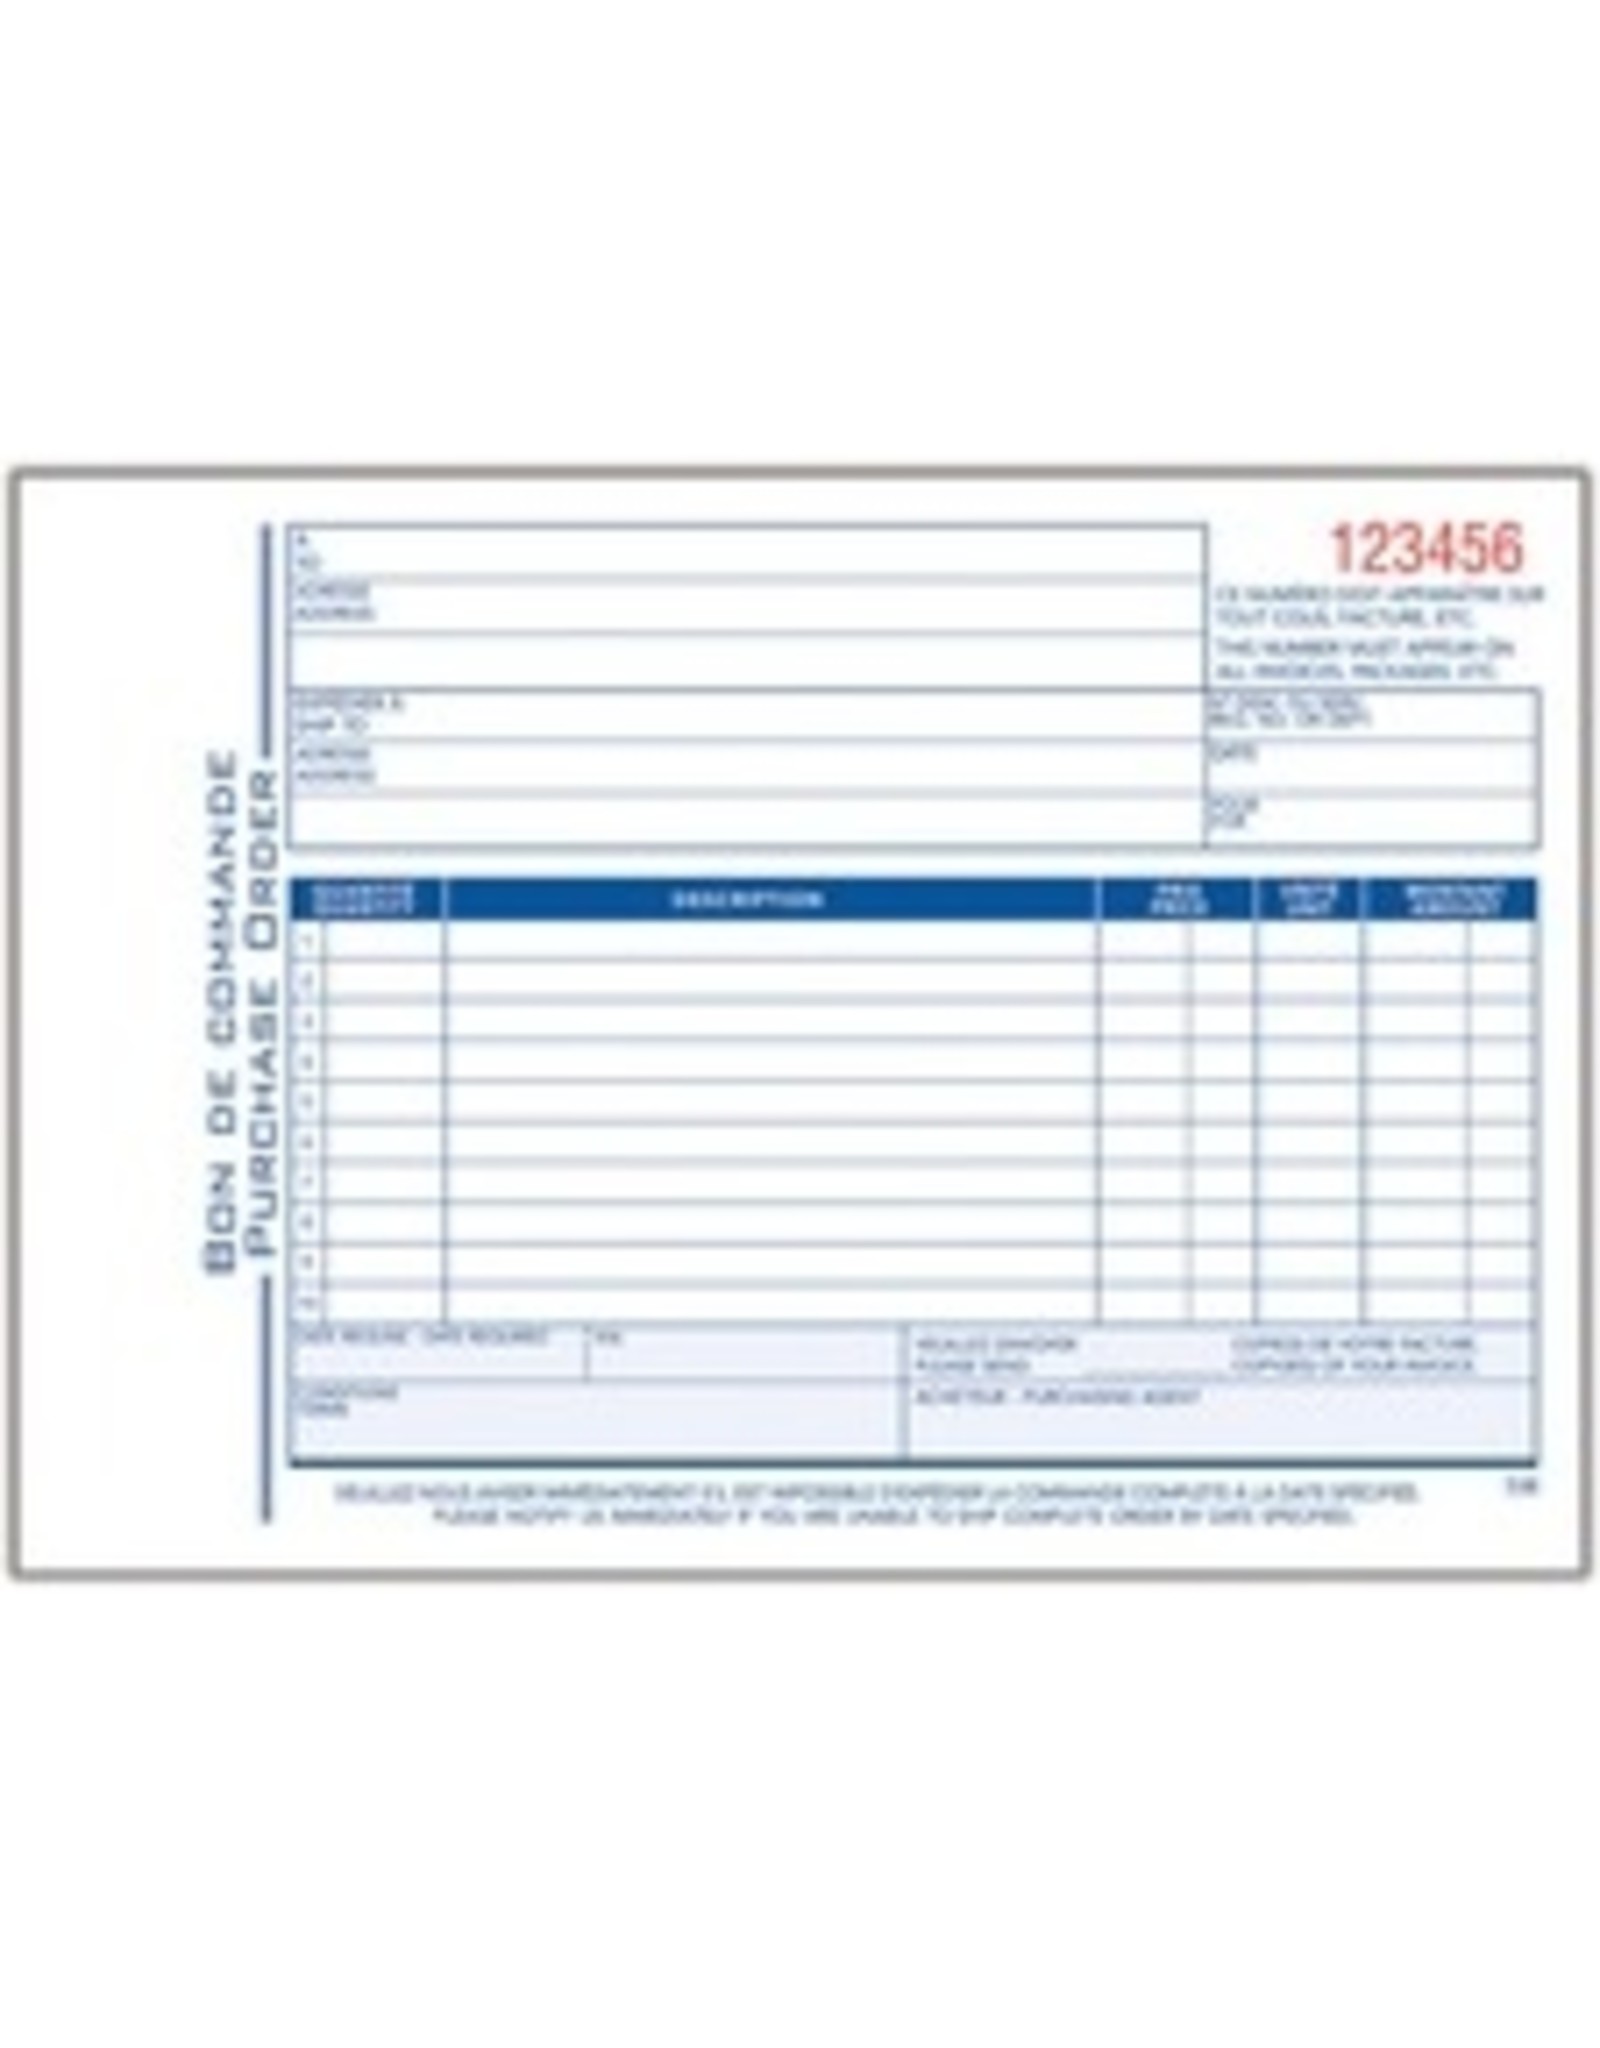 PURCHASE ORDER BOOK 2-PART